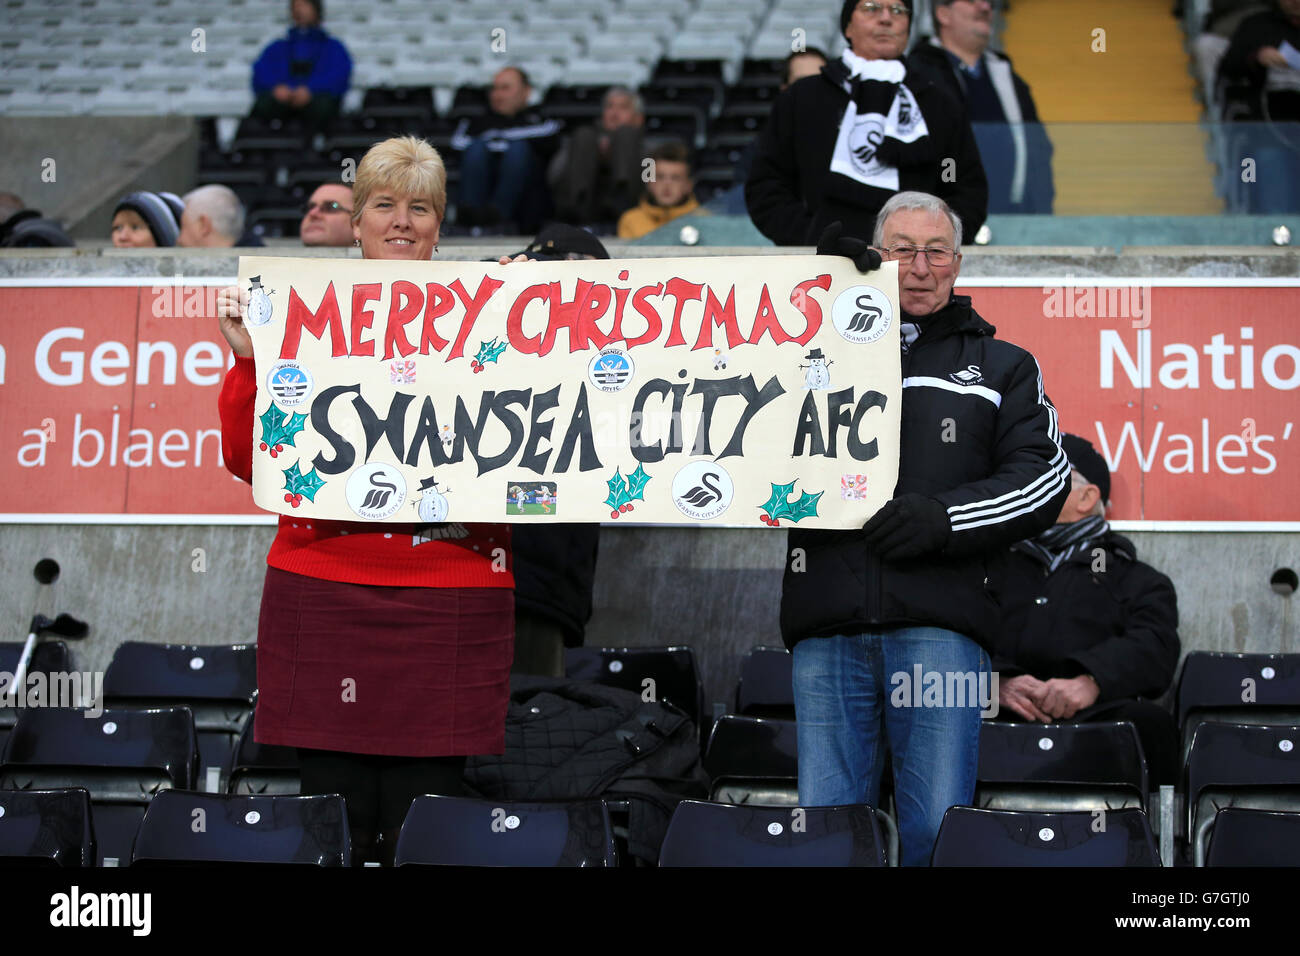 Swansea City fans with a message of seasonal good will in the stands before the Barclays Premier League match at the Liberty Stadium, Swansea. Stock Photo